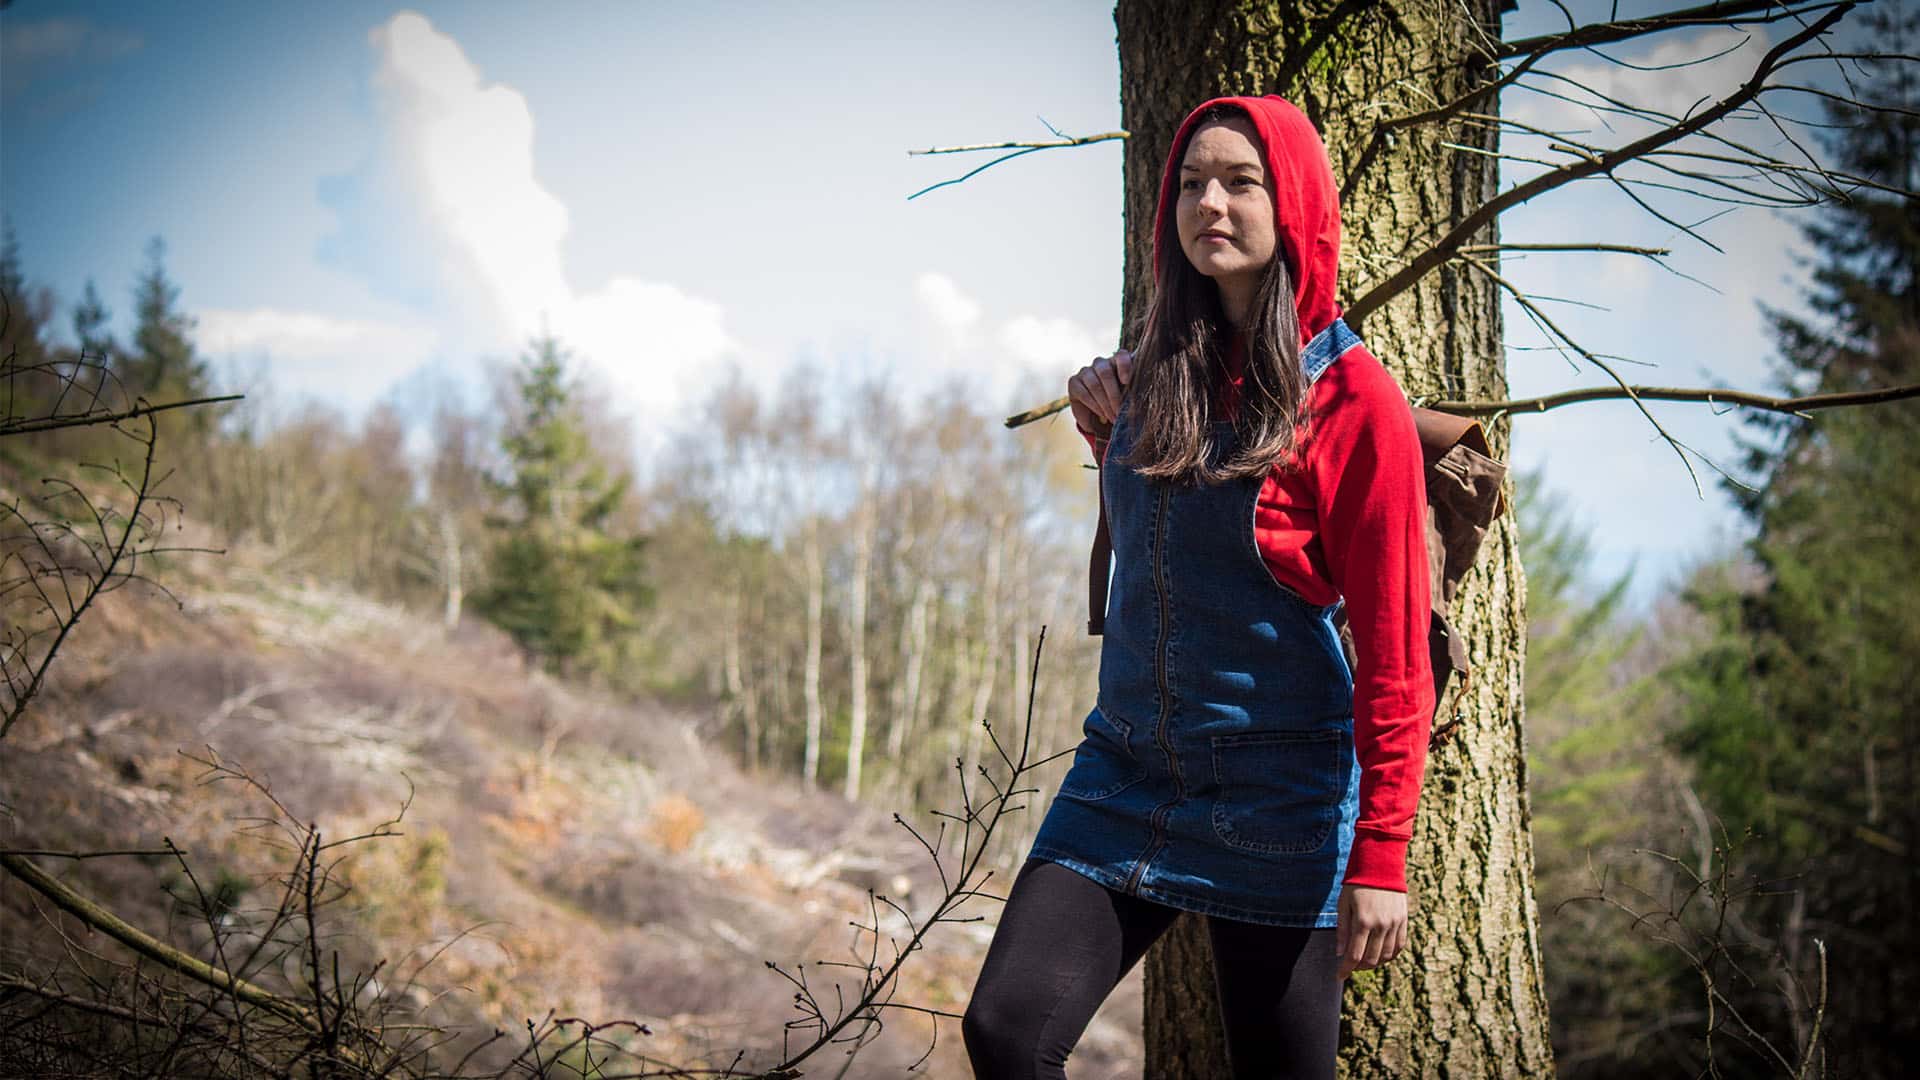 A modern-day Little Red Riding Hood is walking in the woods, wearing a blue jean overall dress with a red hoodie underneath, long brown hair peaking from under the hood. She's looking really determined.